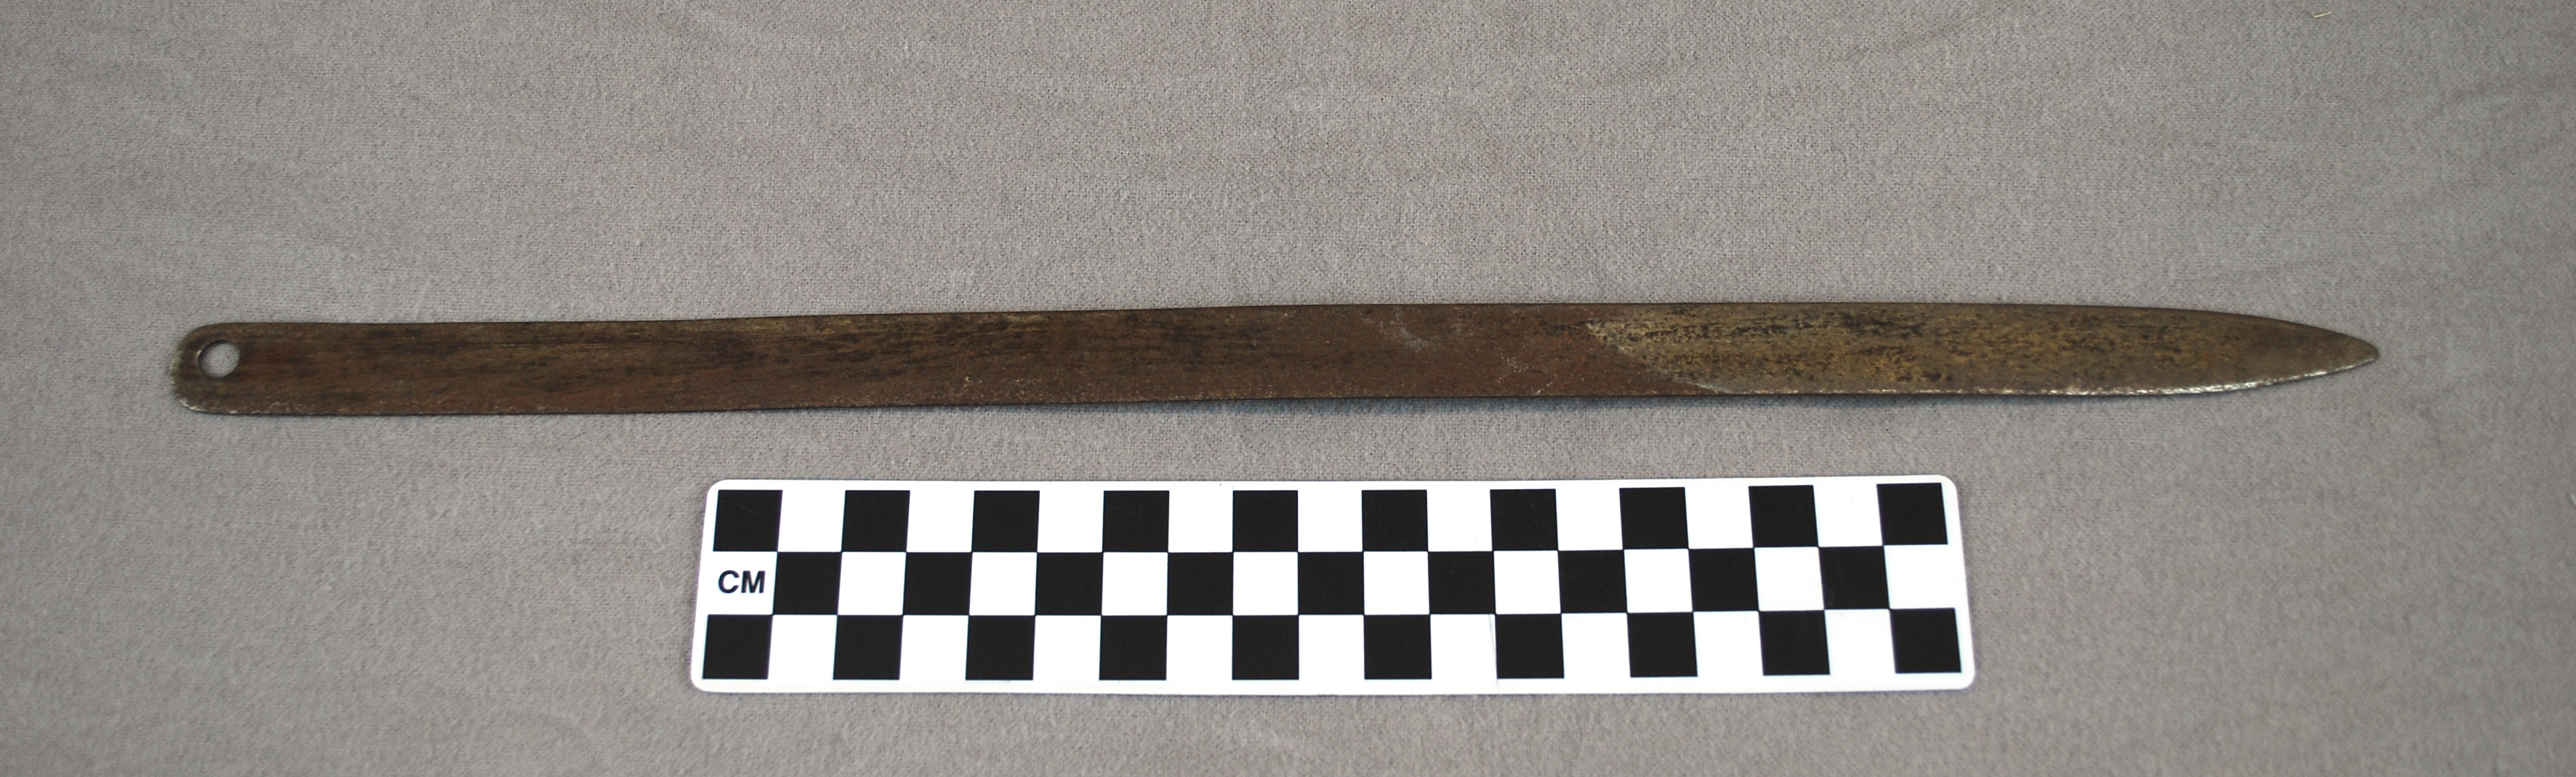 Object: Thatching needle | UTSA Institute Of Texan Cultures